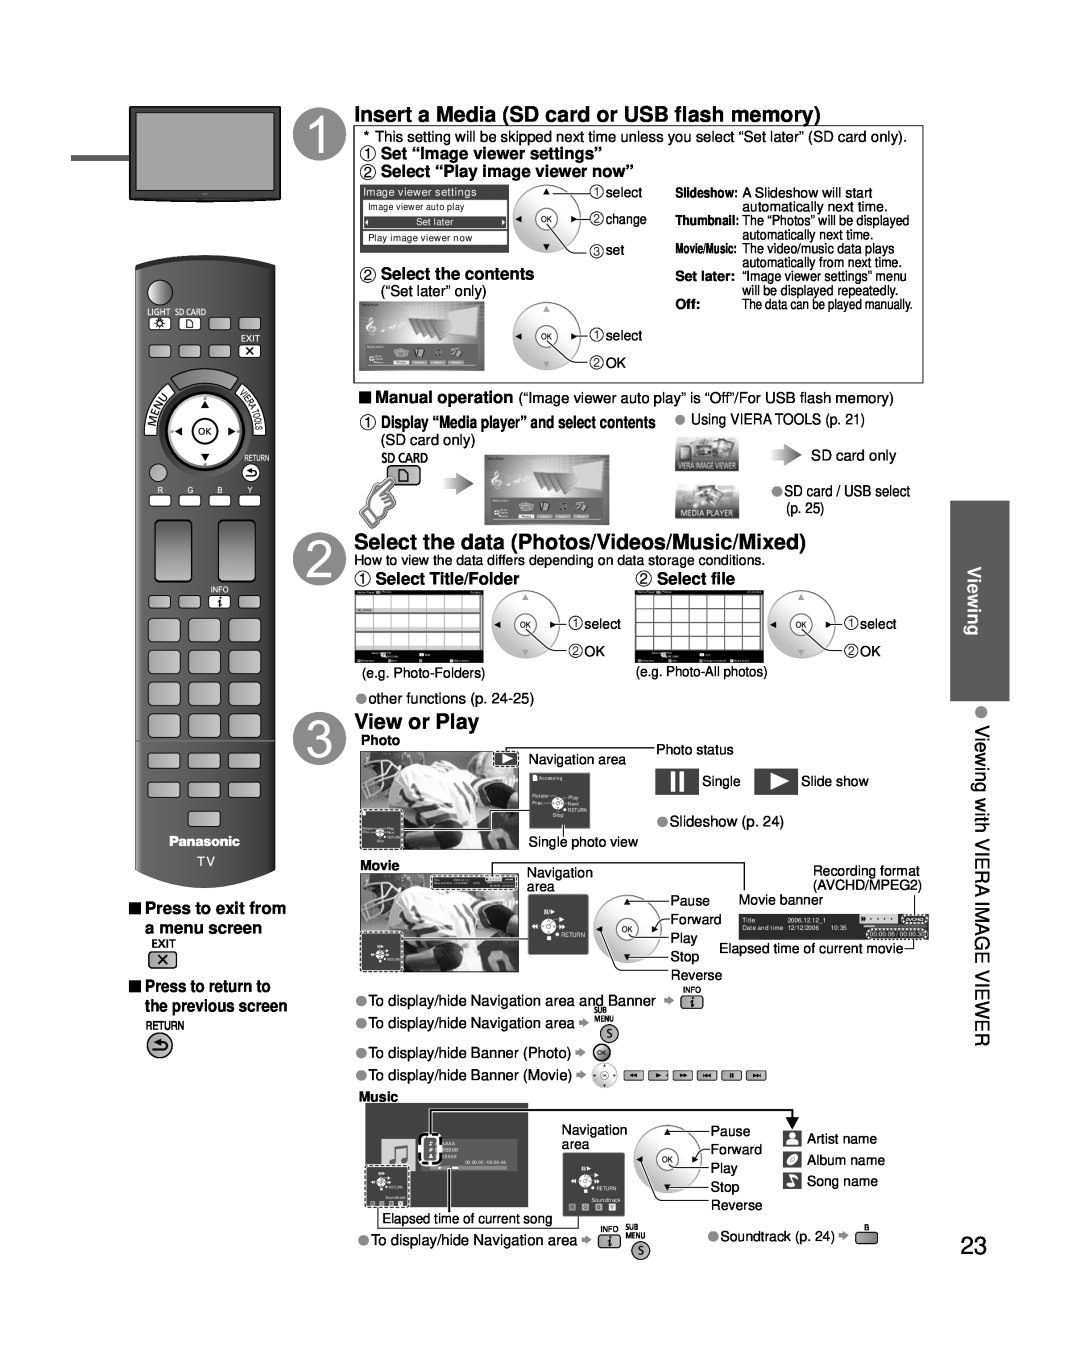 Panasonic TC-P54G25 View or Play, Viewing with VIERA IMAGE, Viewer, Select the contents, Press to exit from a menu screen 